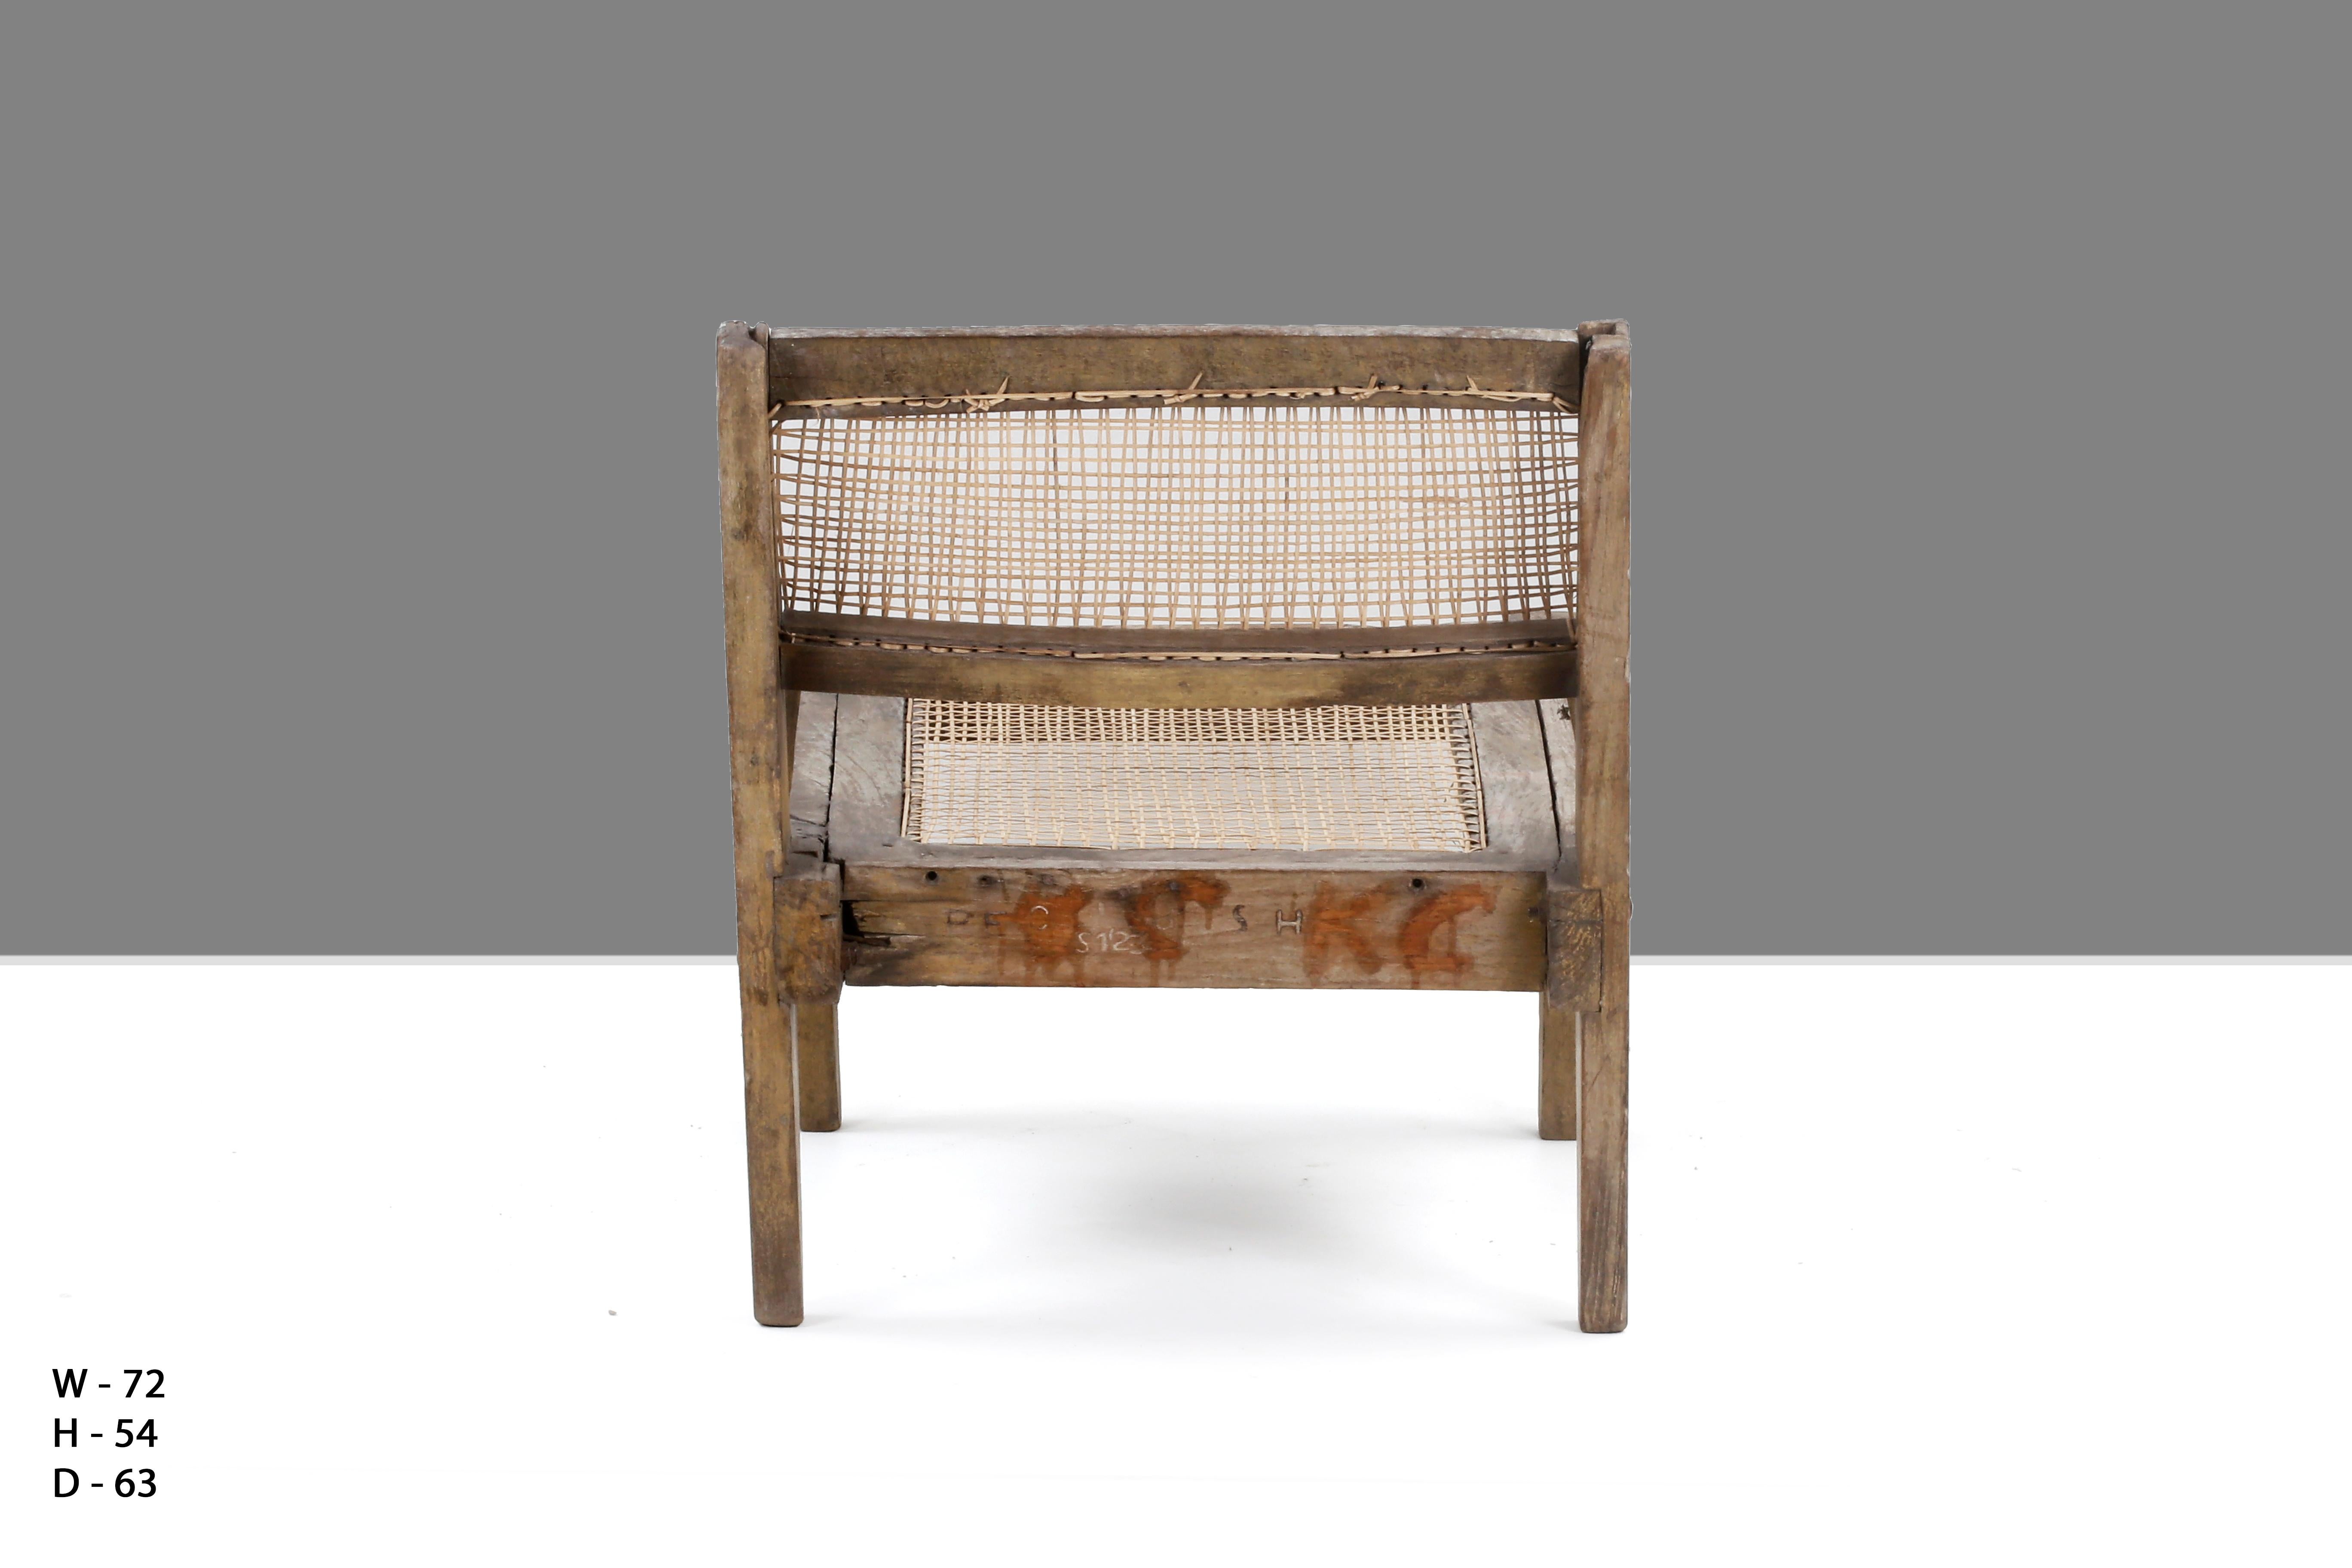 20th Century Pierre Jeanneret PJ-SI-10-A Fireside chair / Authentic Mid-Century Modern For Sale